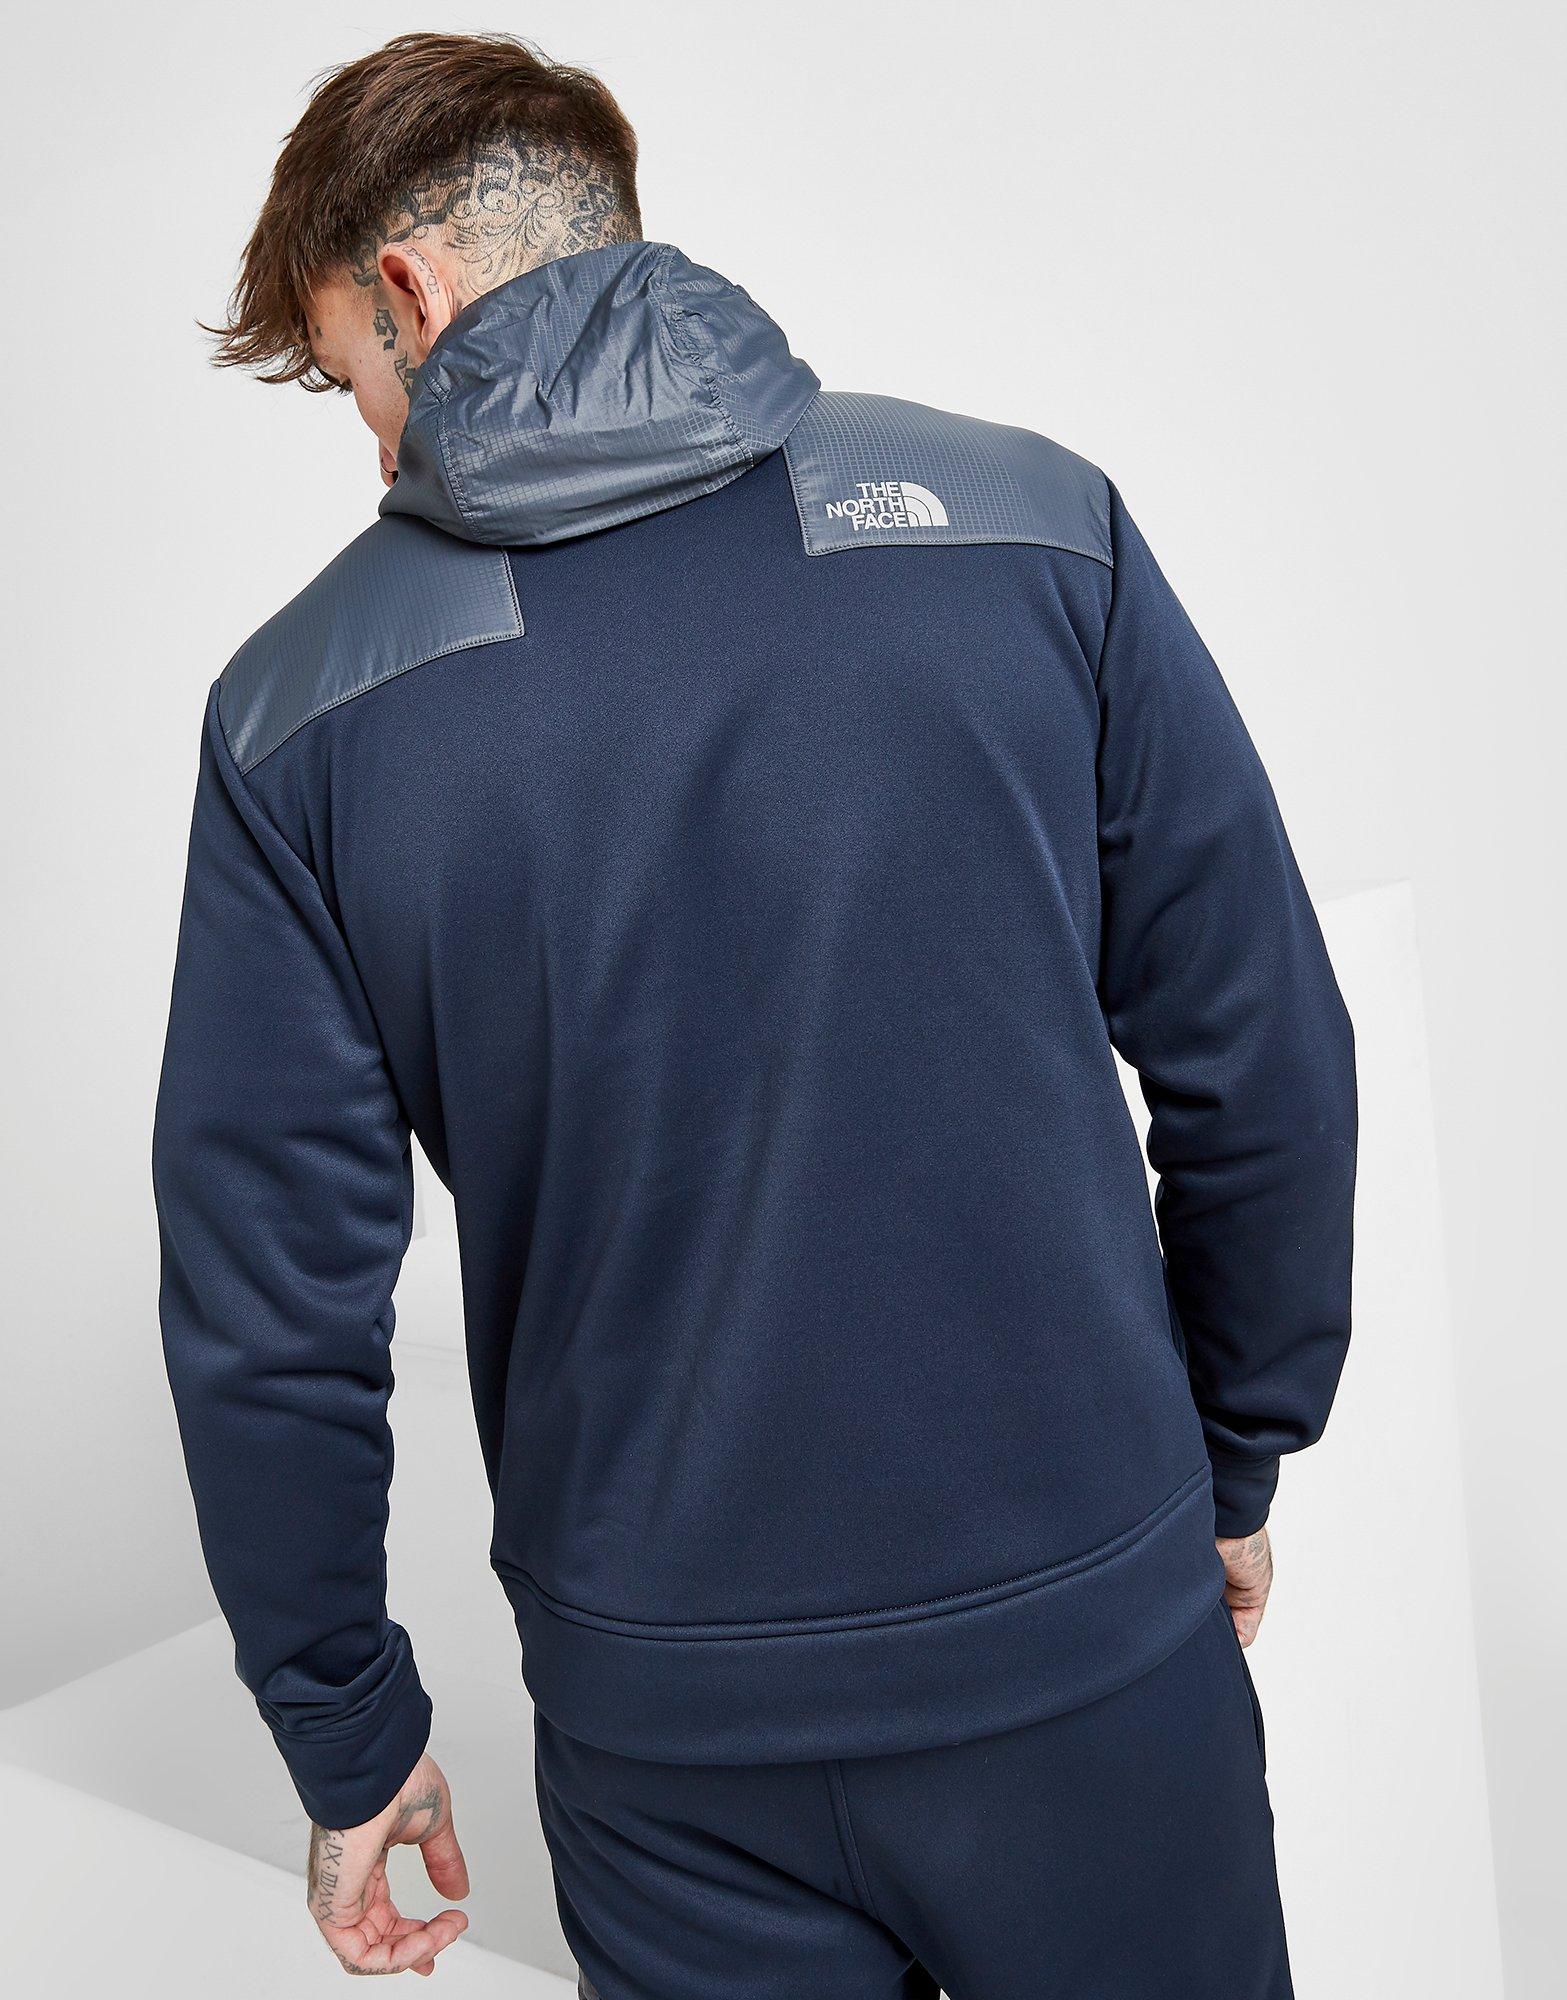 grey and blue north face hoodie